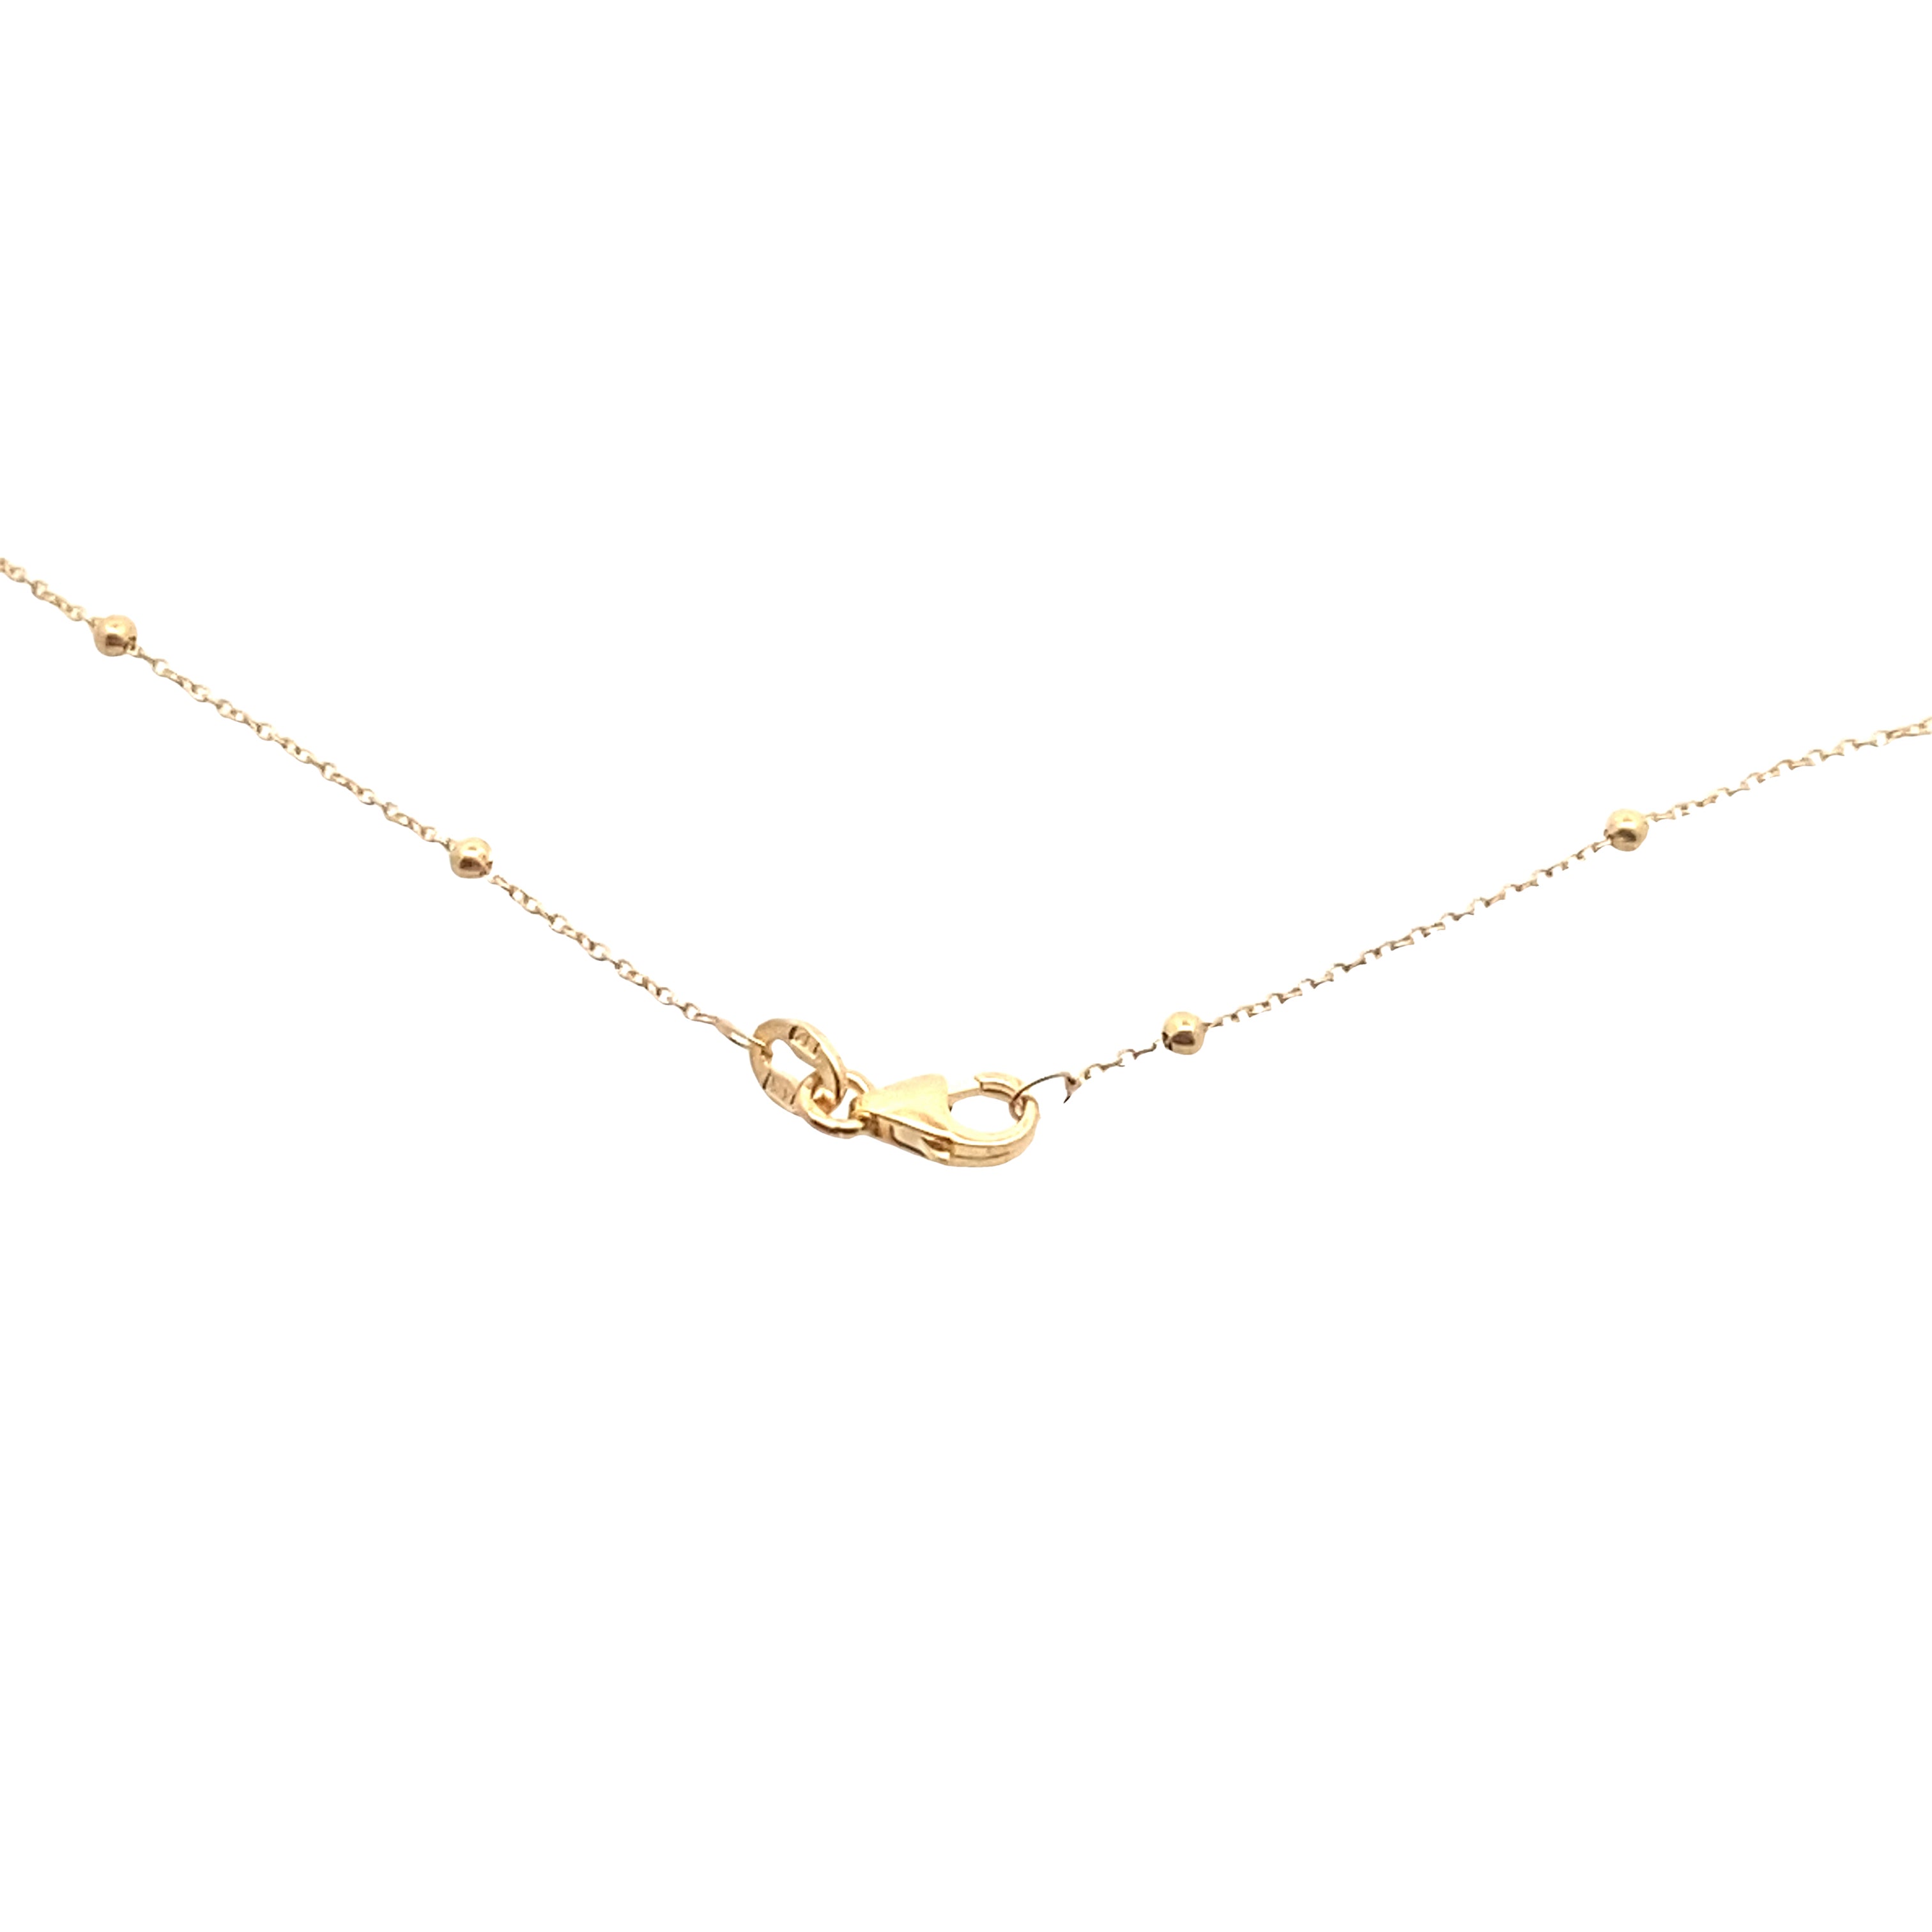 14K Beaded Cable Chain